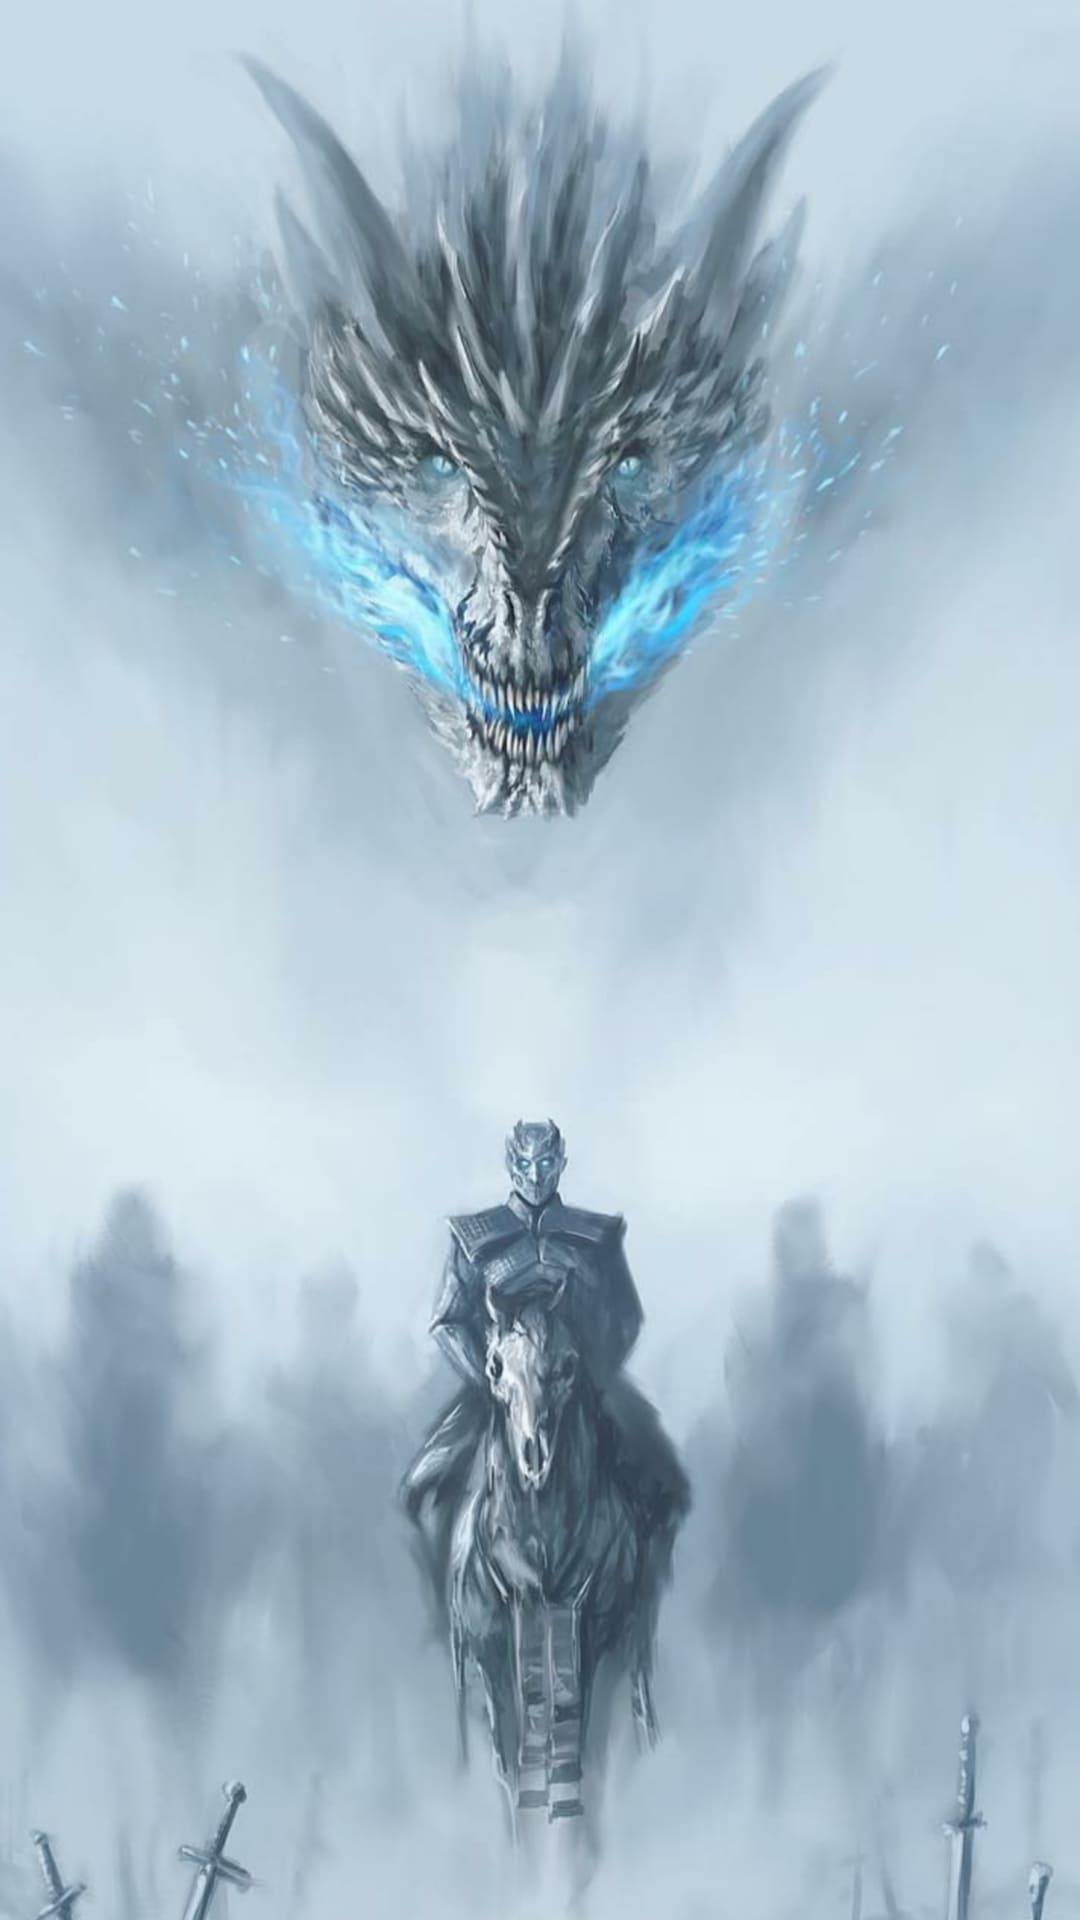 Game of Thrones Wallpapers - Top Best 75 Game of Thrones Backgrounds